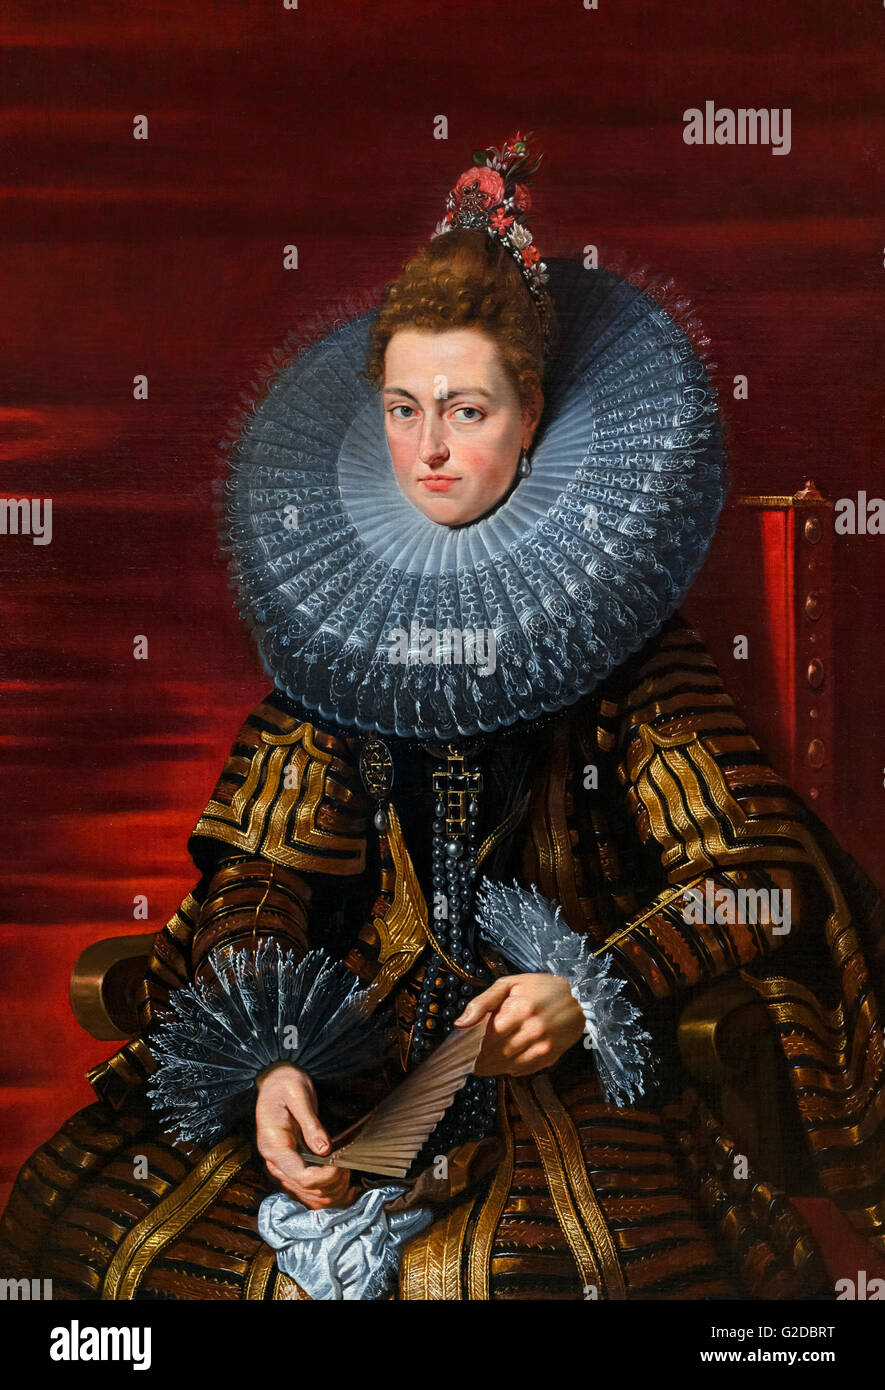 Infanta Isabella of Spain. Portrait of the Infanta Isabella by the Studio of Peter Paul Rubens, oil on canvas, c.1615.  Isabella Clara Eugenia (Isabel Clara Eugenia; 1566-1633) was sovereign of the Spanish Netherlands in the Low Countries and the north of modern France, together with her husband Albert. In some sources, she is referred to as Clara Isabella Eugenia. By birth, she was an infanta of Spain and Portugal. Stock Photo